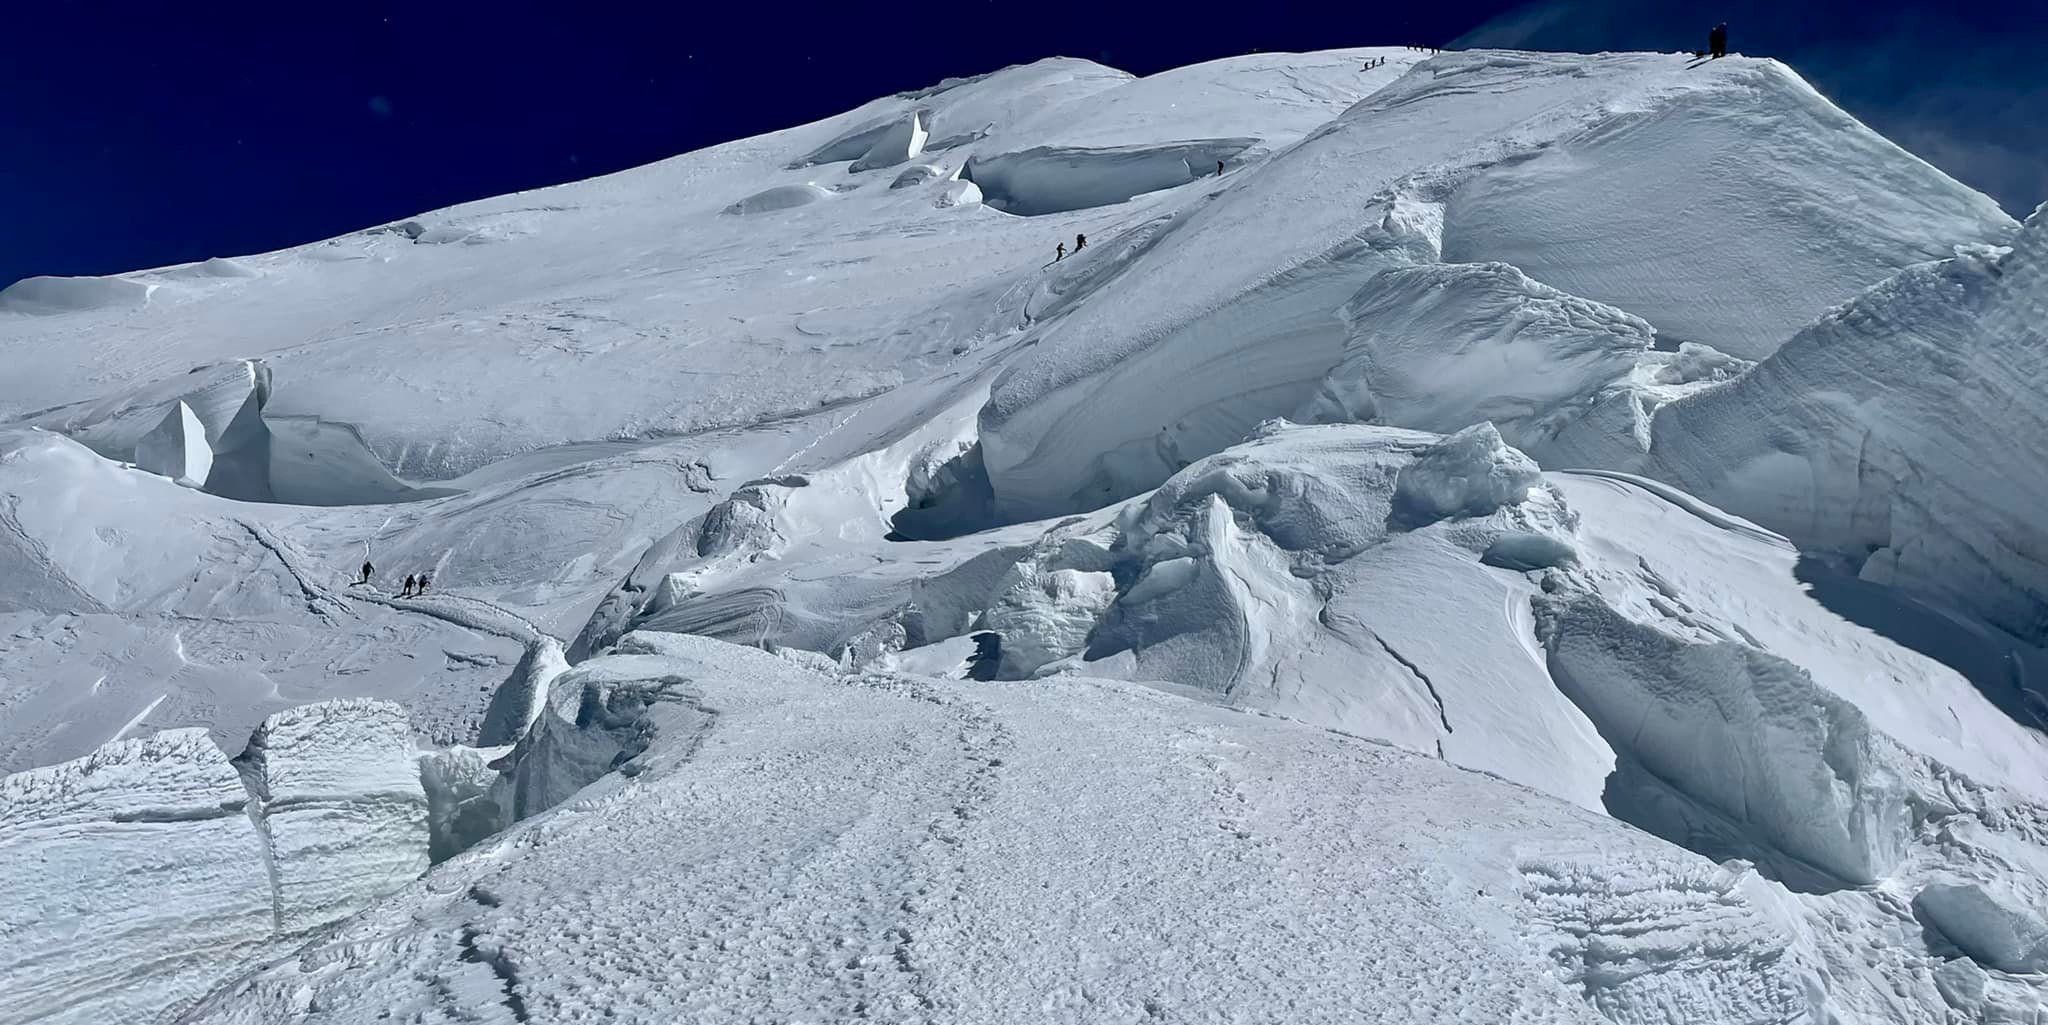 Crevasses on Normal route of ascent on Mont Blanc